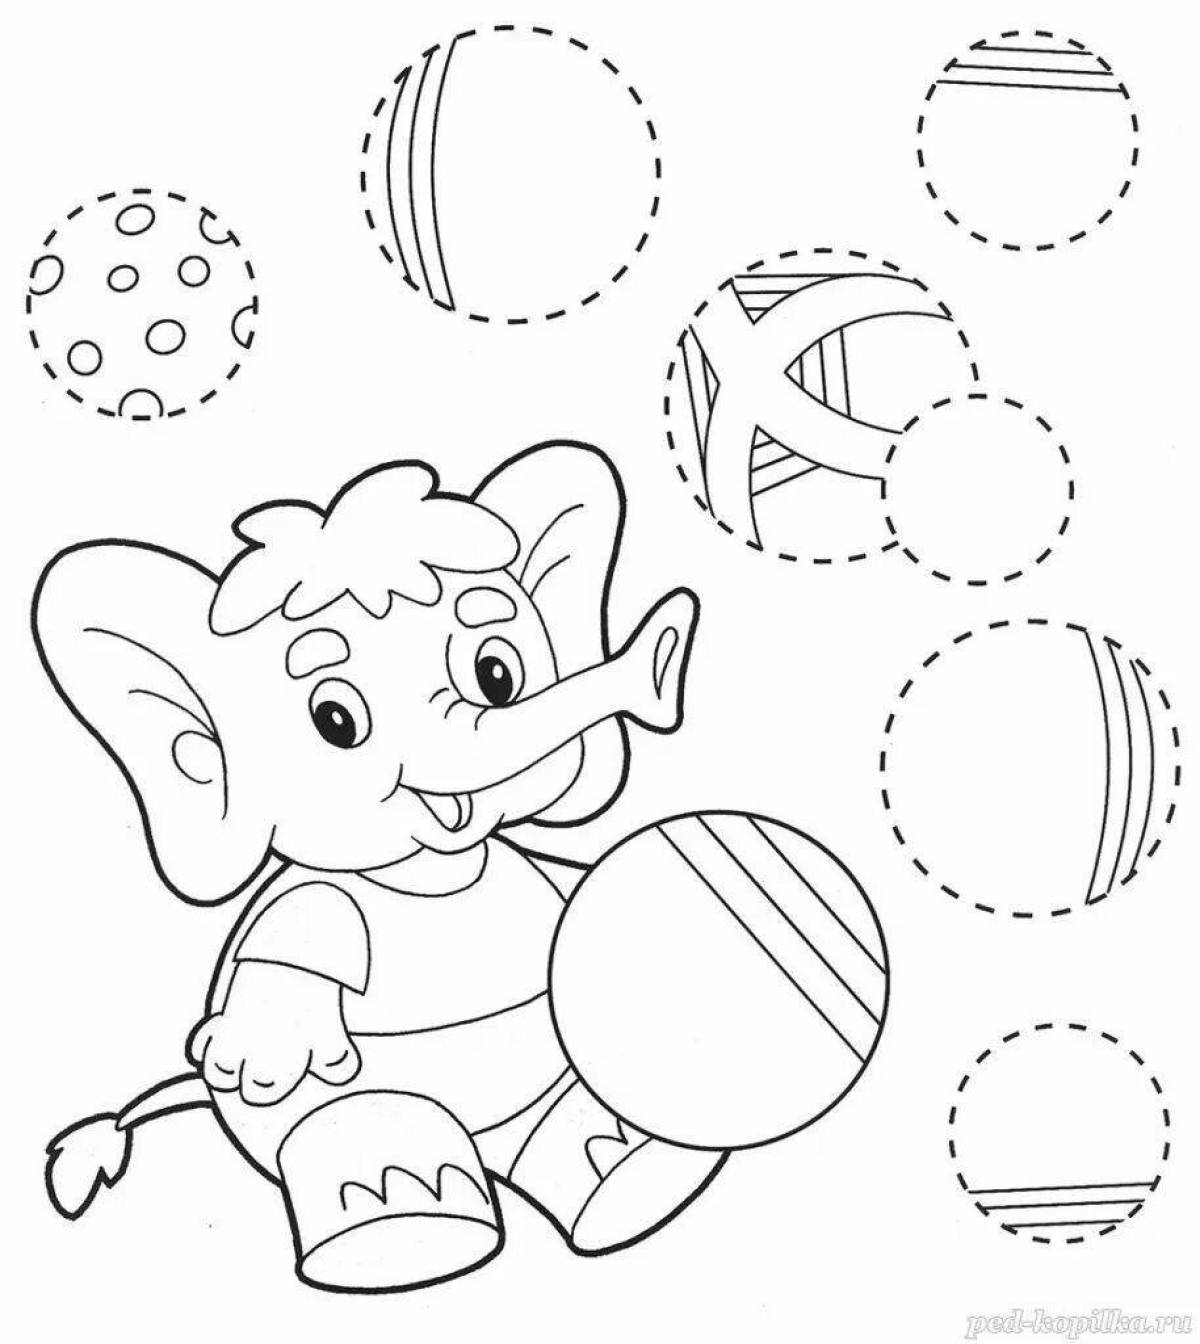 Creative coloring book 3-4 years old